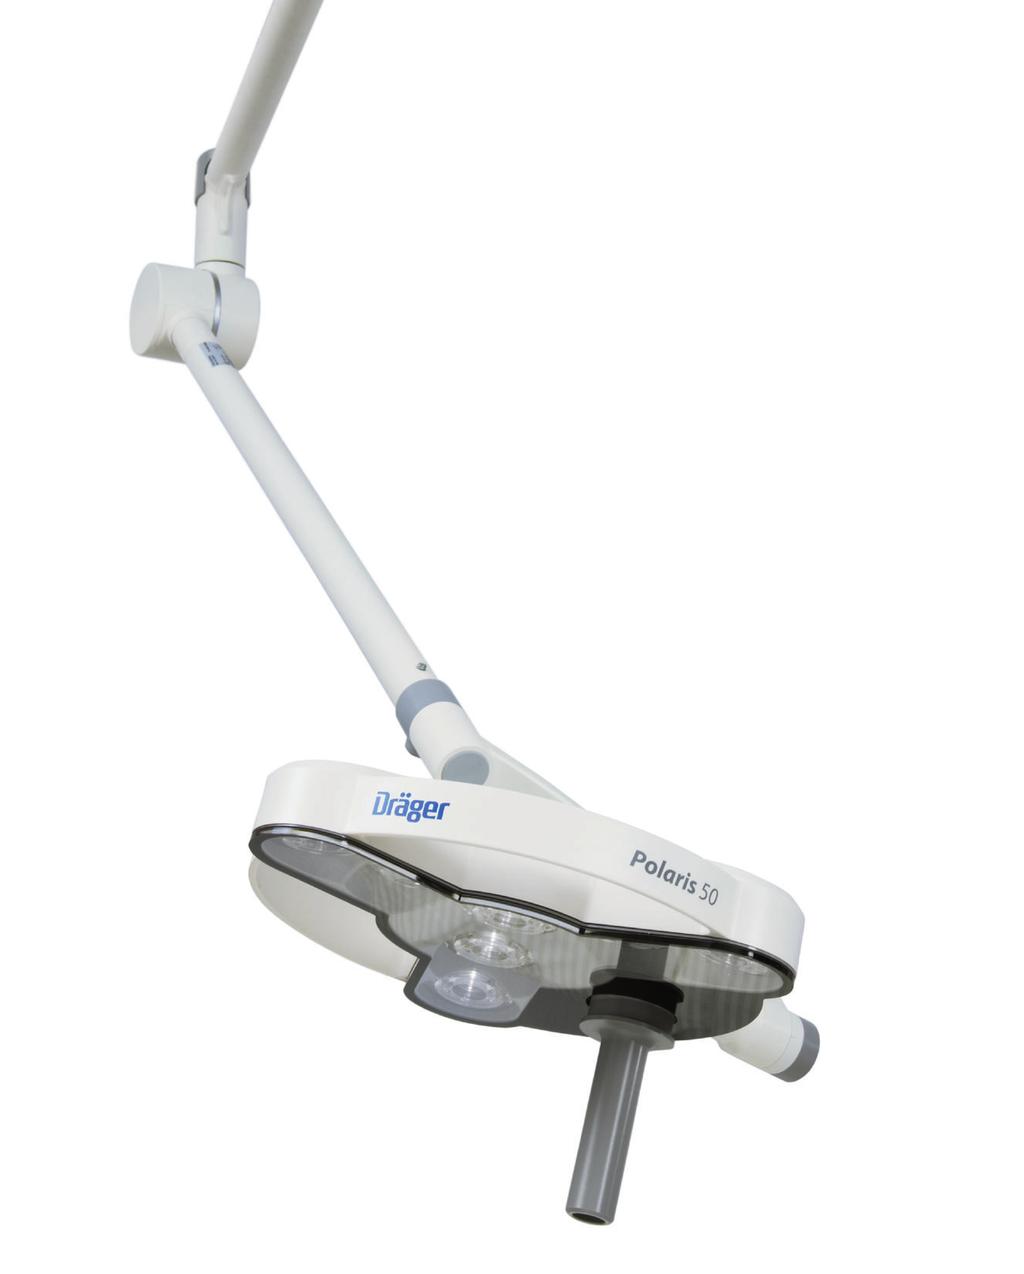 Polaris 50 Medical Lights and Video The Polaris 50 is ideal for everyday hospital life, which is becoming more and more challenging.